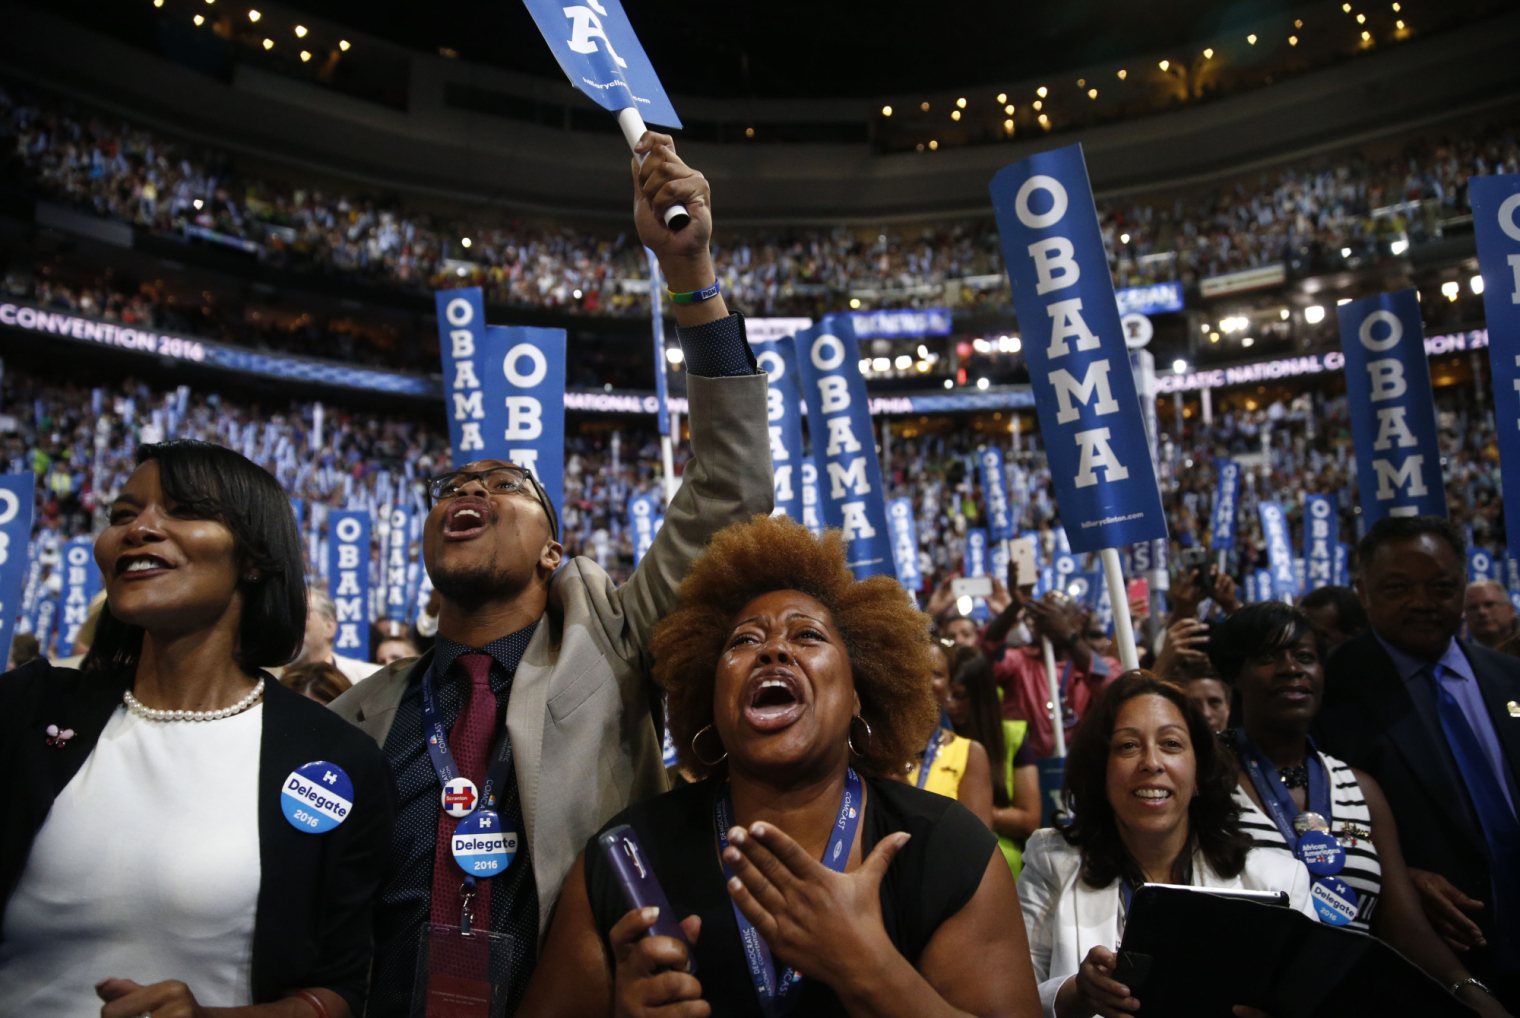 The 2016 Democratic National Convention in Pictures Bloomberg